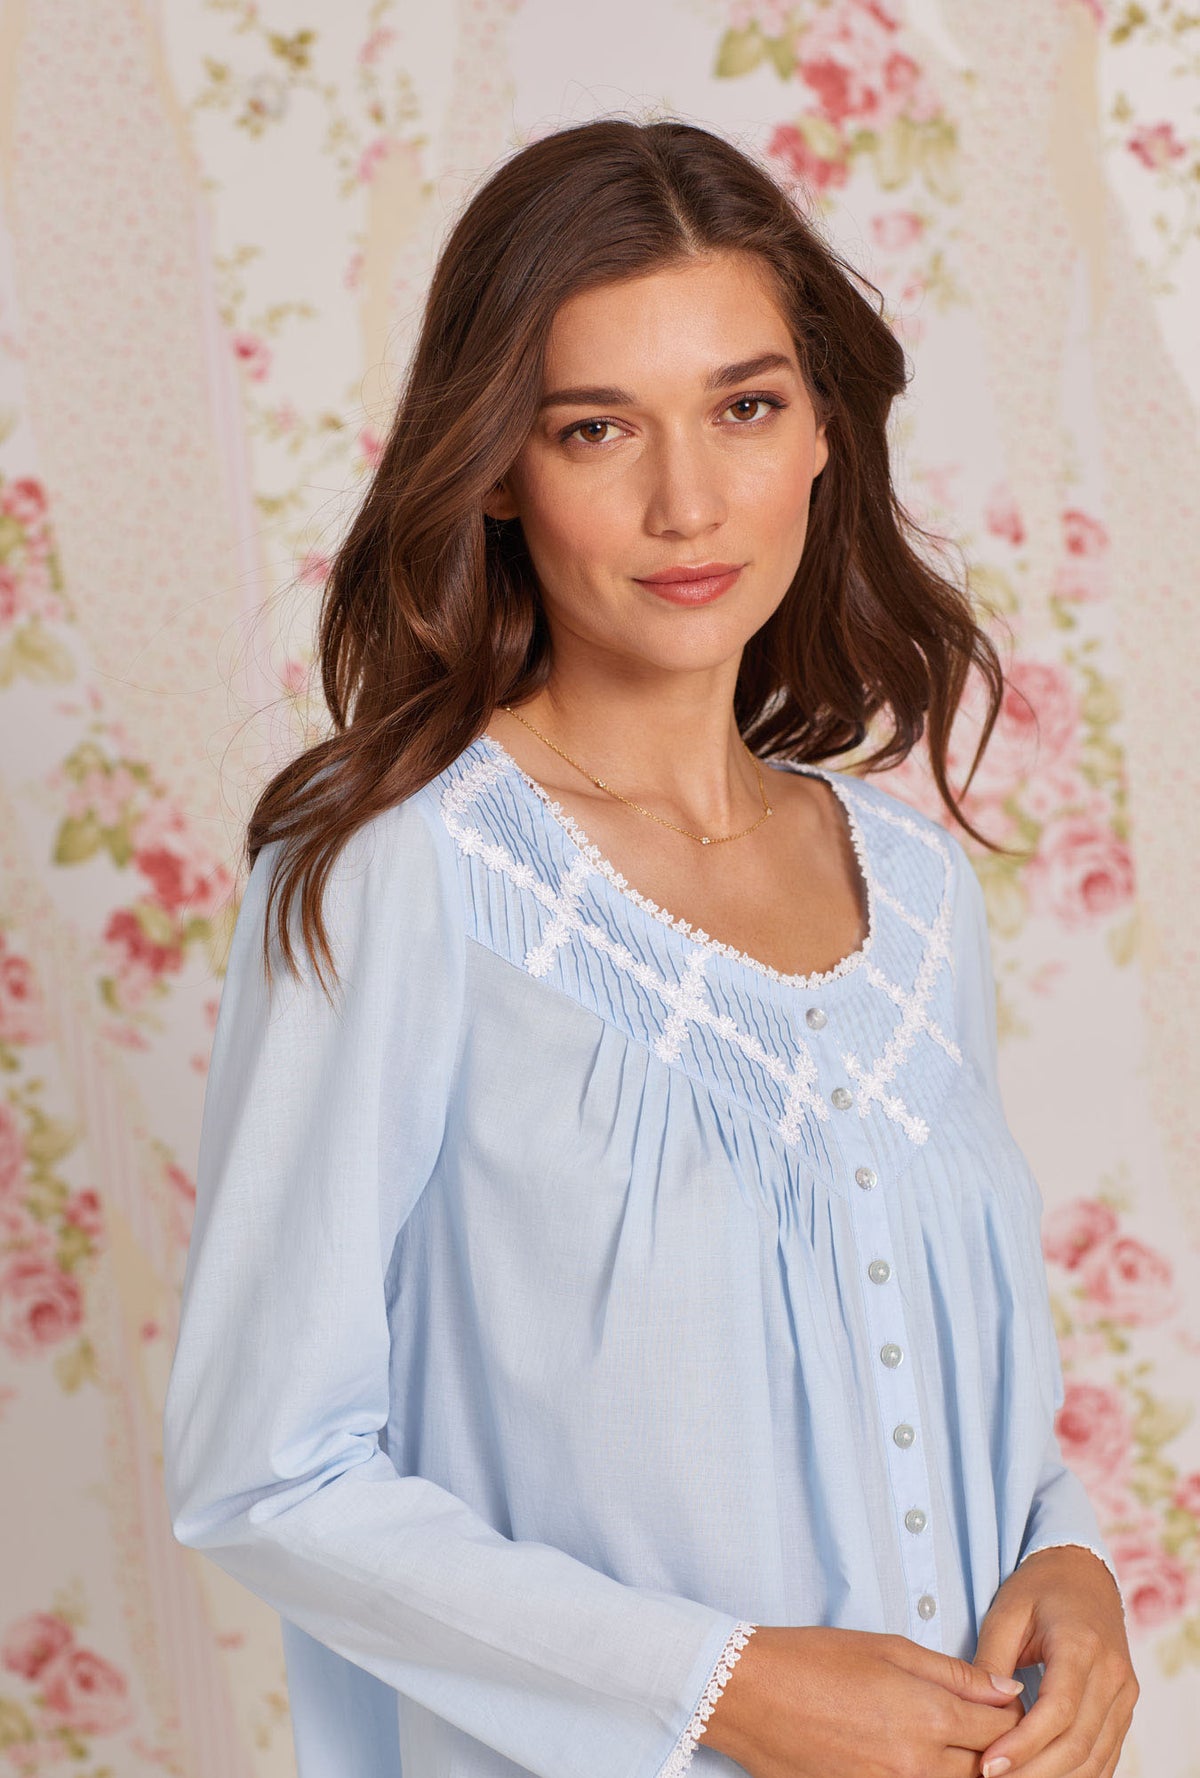 A lady wearing blue long sleeve poetic nightgown.